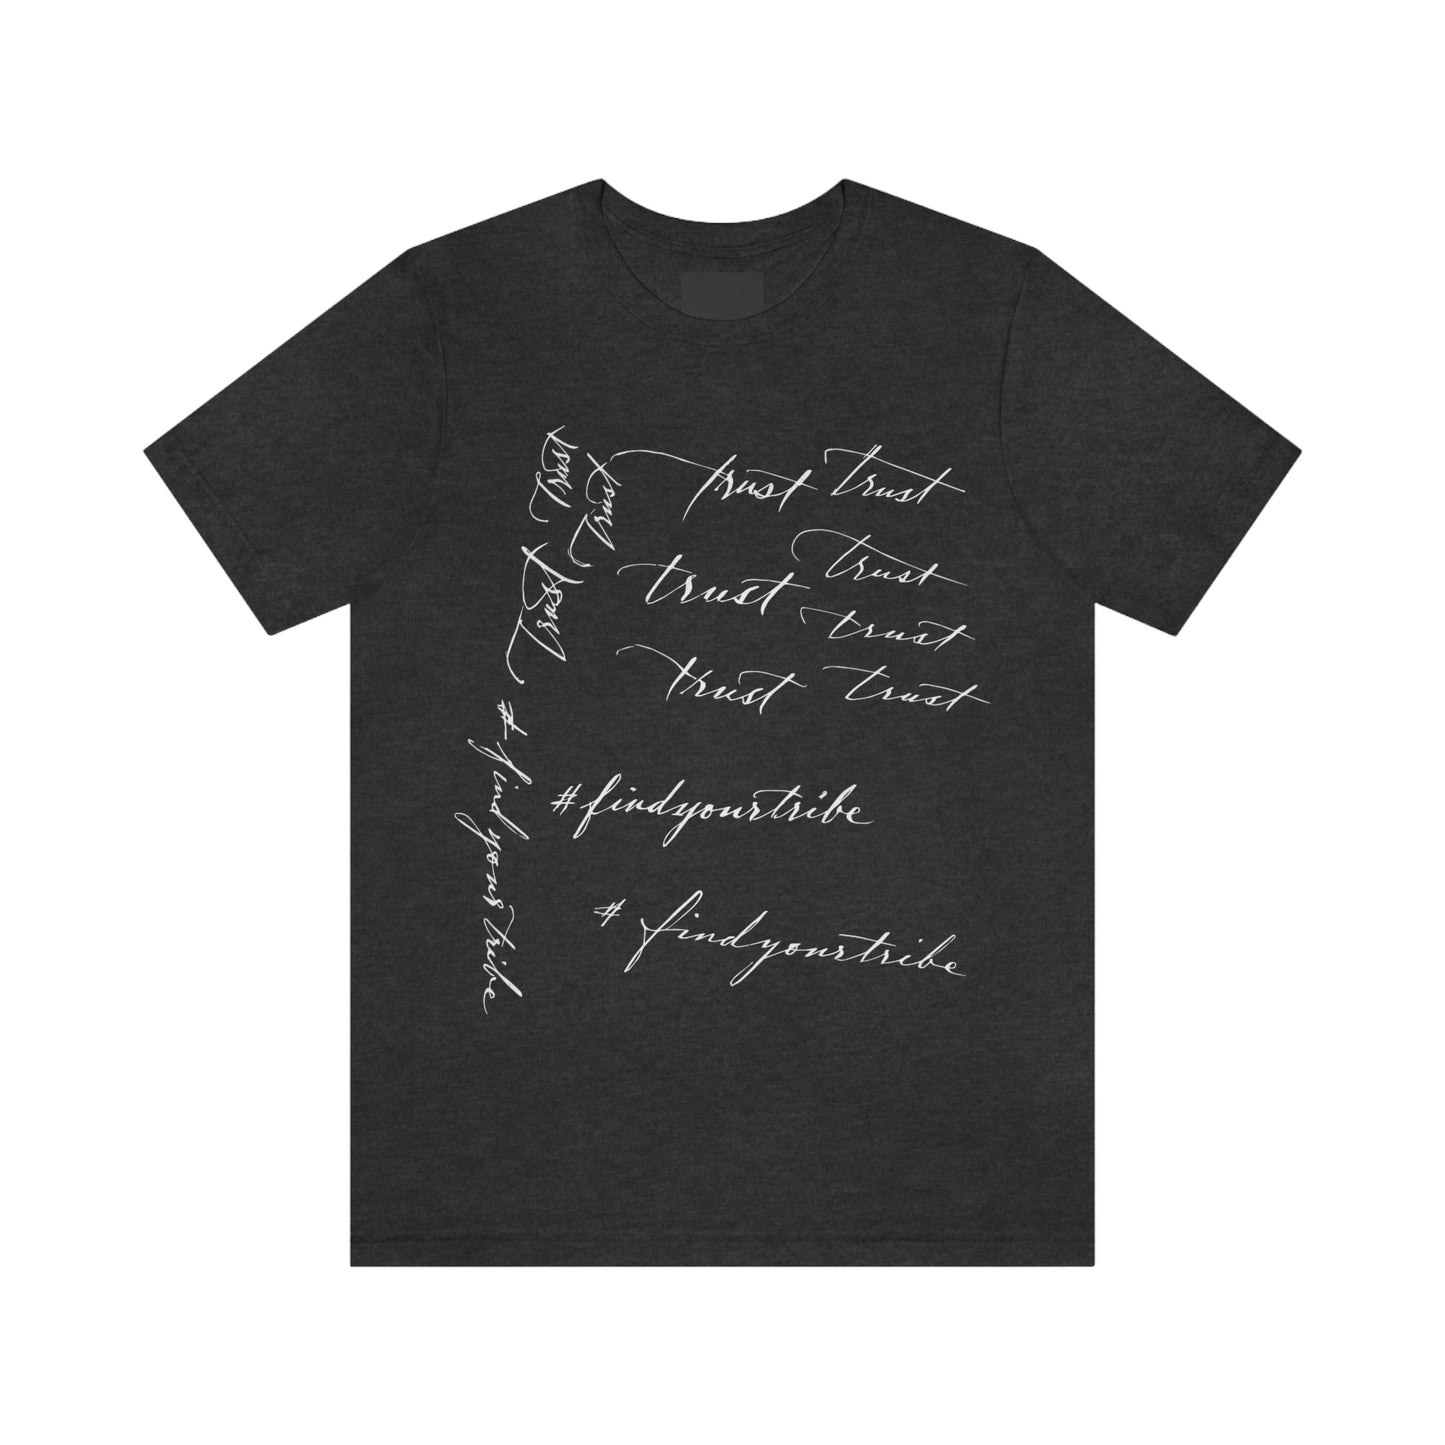 "Trust" Mixed Messages Unisex Tee